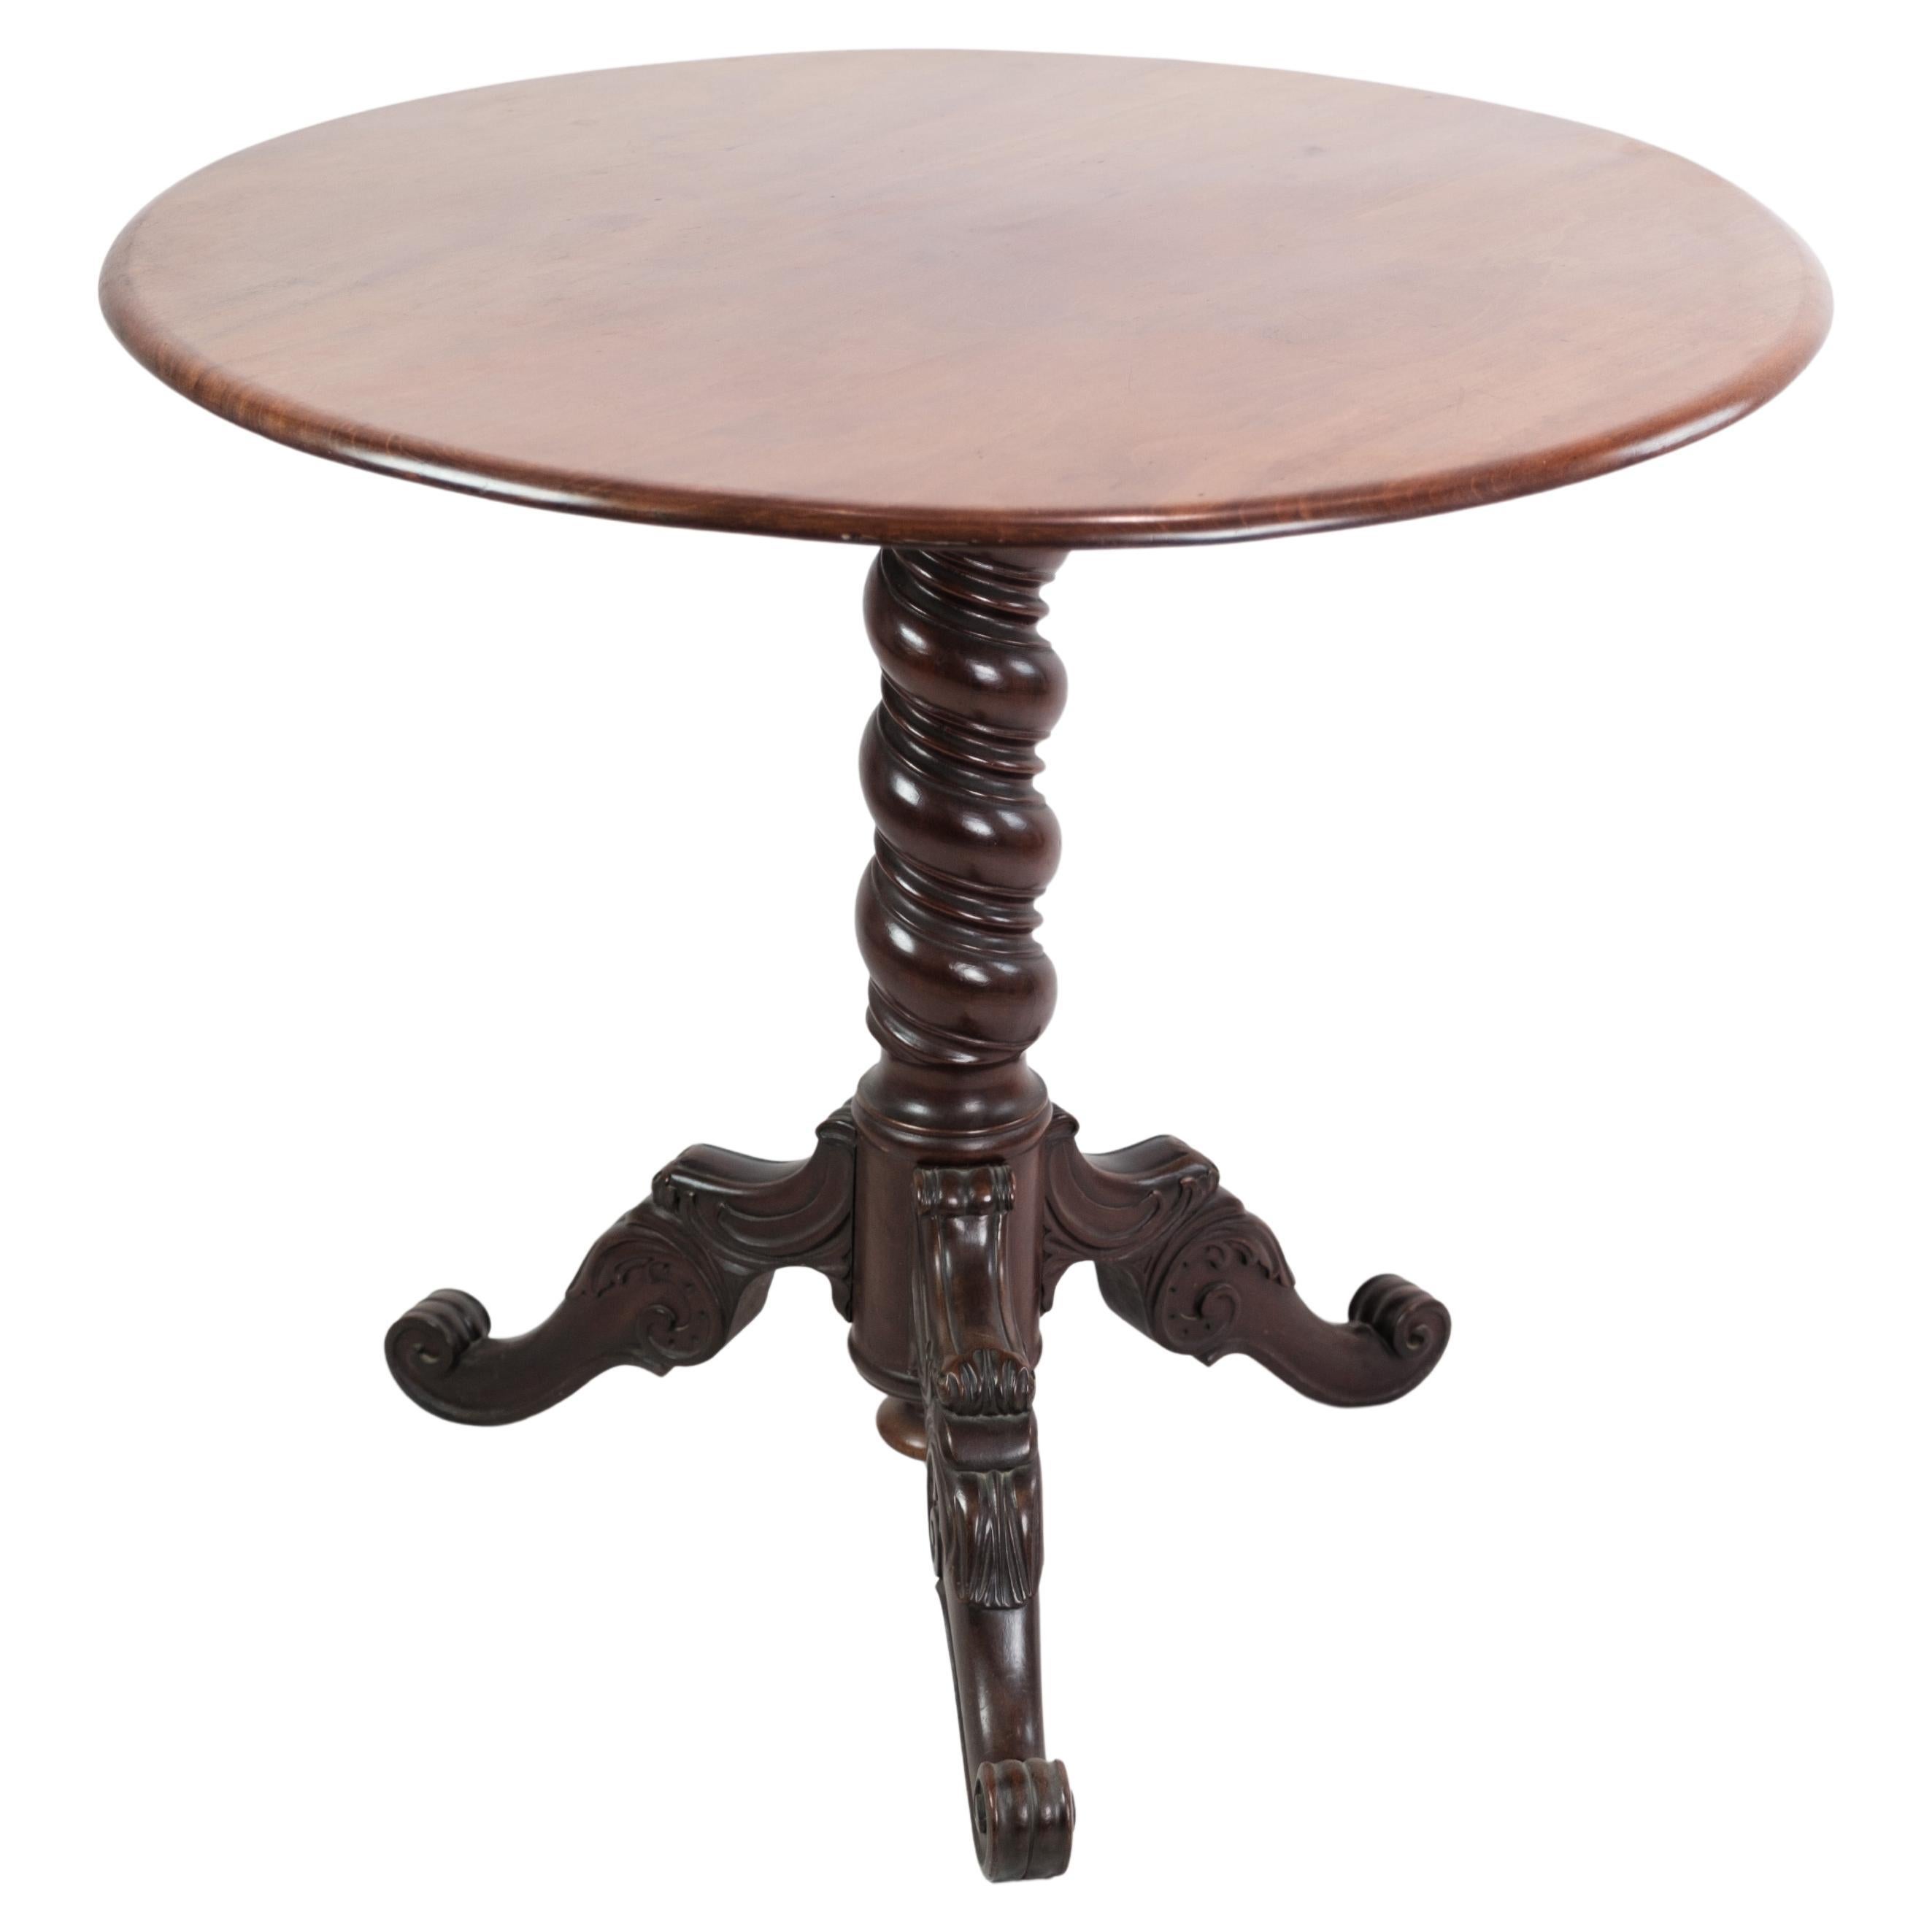 Pedestal Table/Side Table Originating From Denmark Made In Mahogany From 1860s For Sale